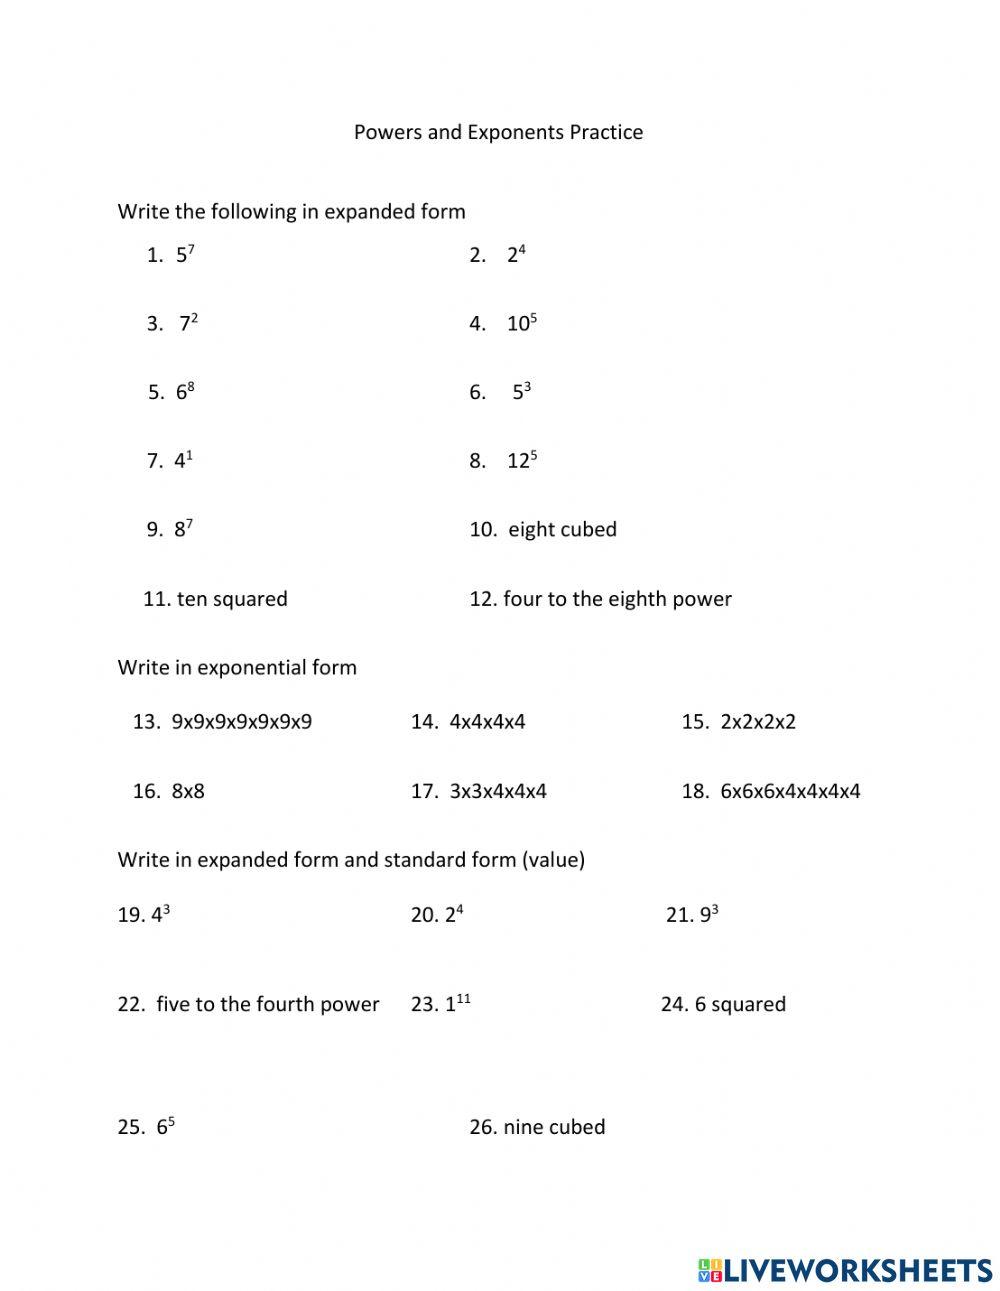 Powers and Exponents Practice